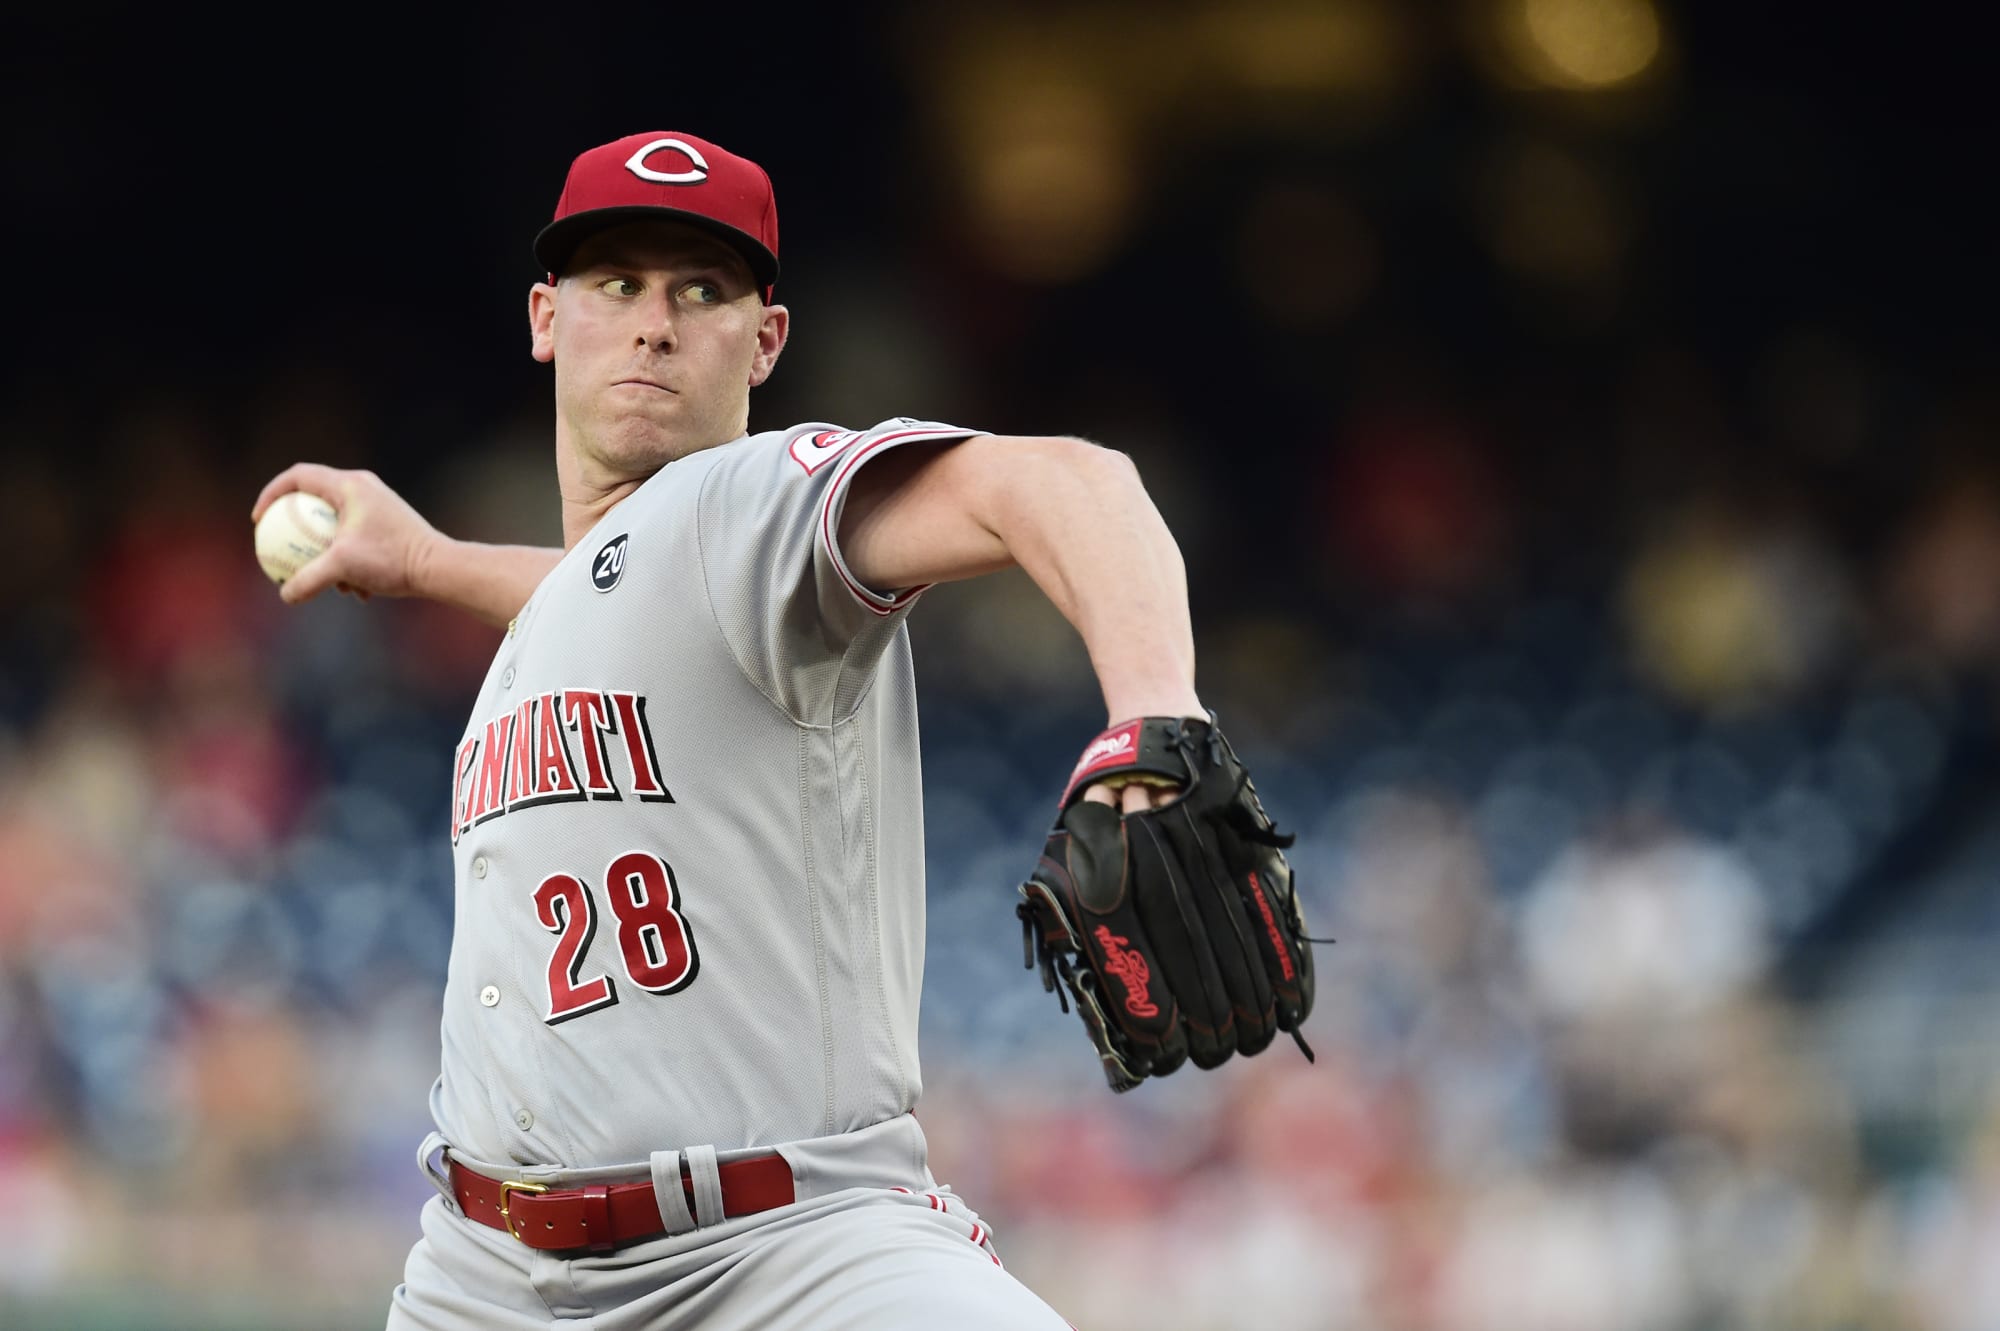 Cincinnati Reds: Anthony DeSclafani should be offered long-term contract